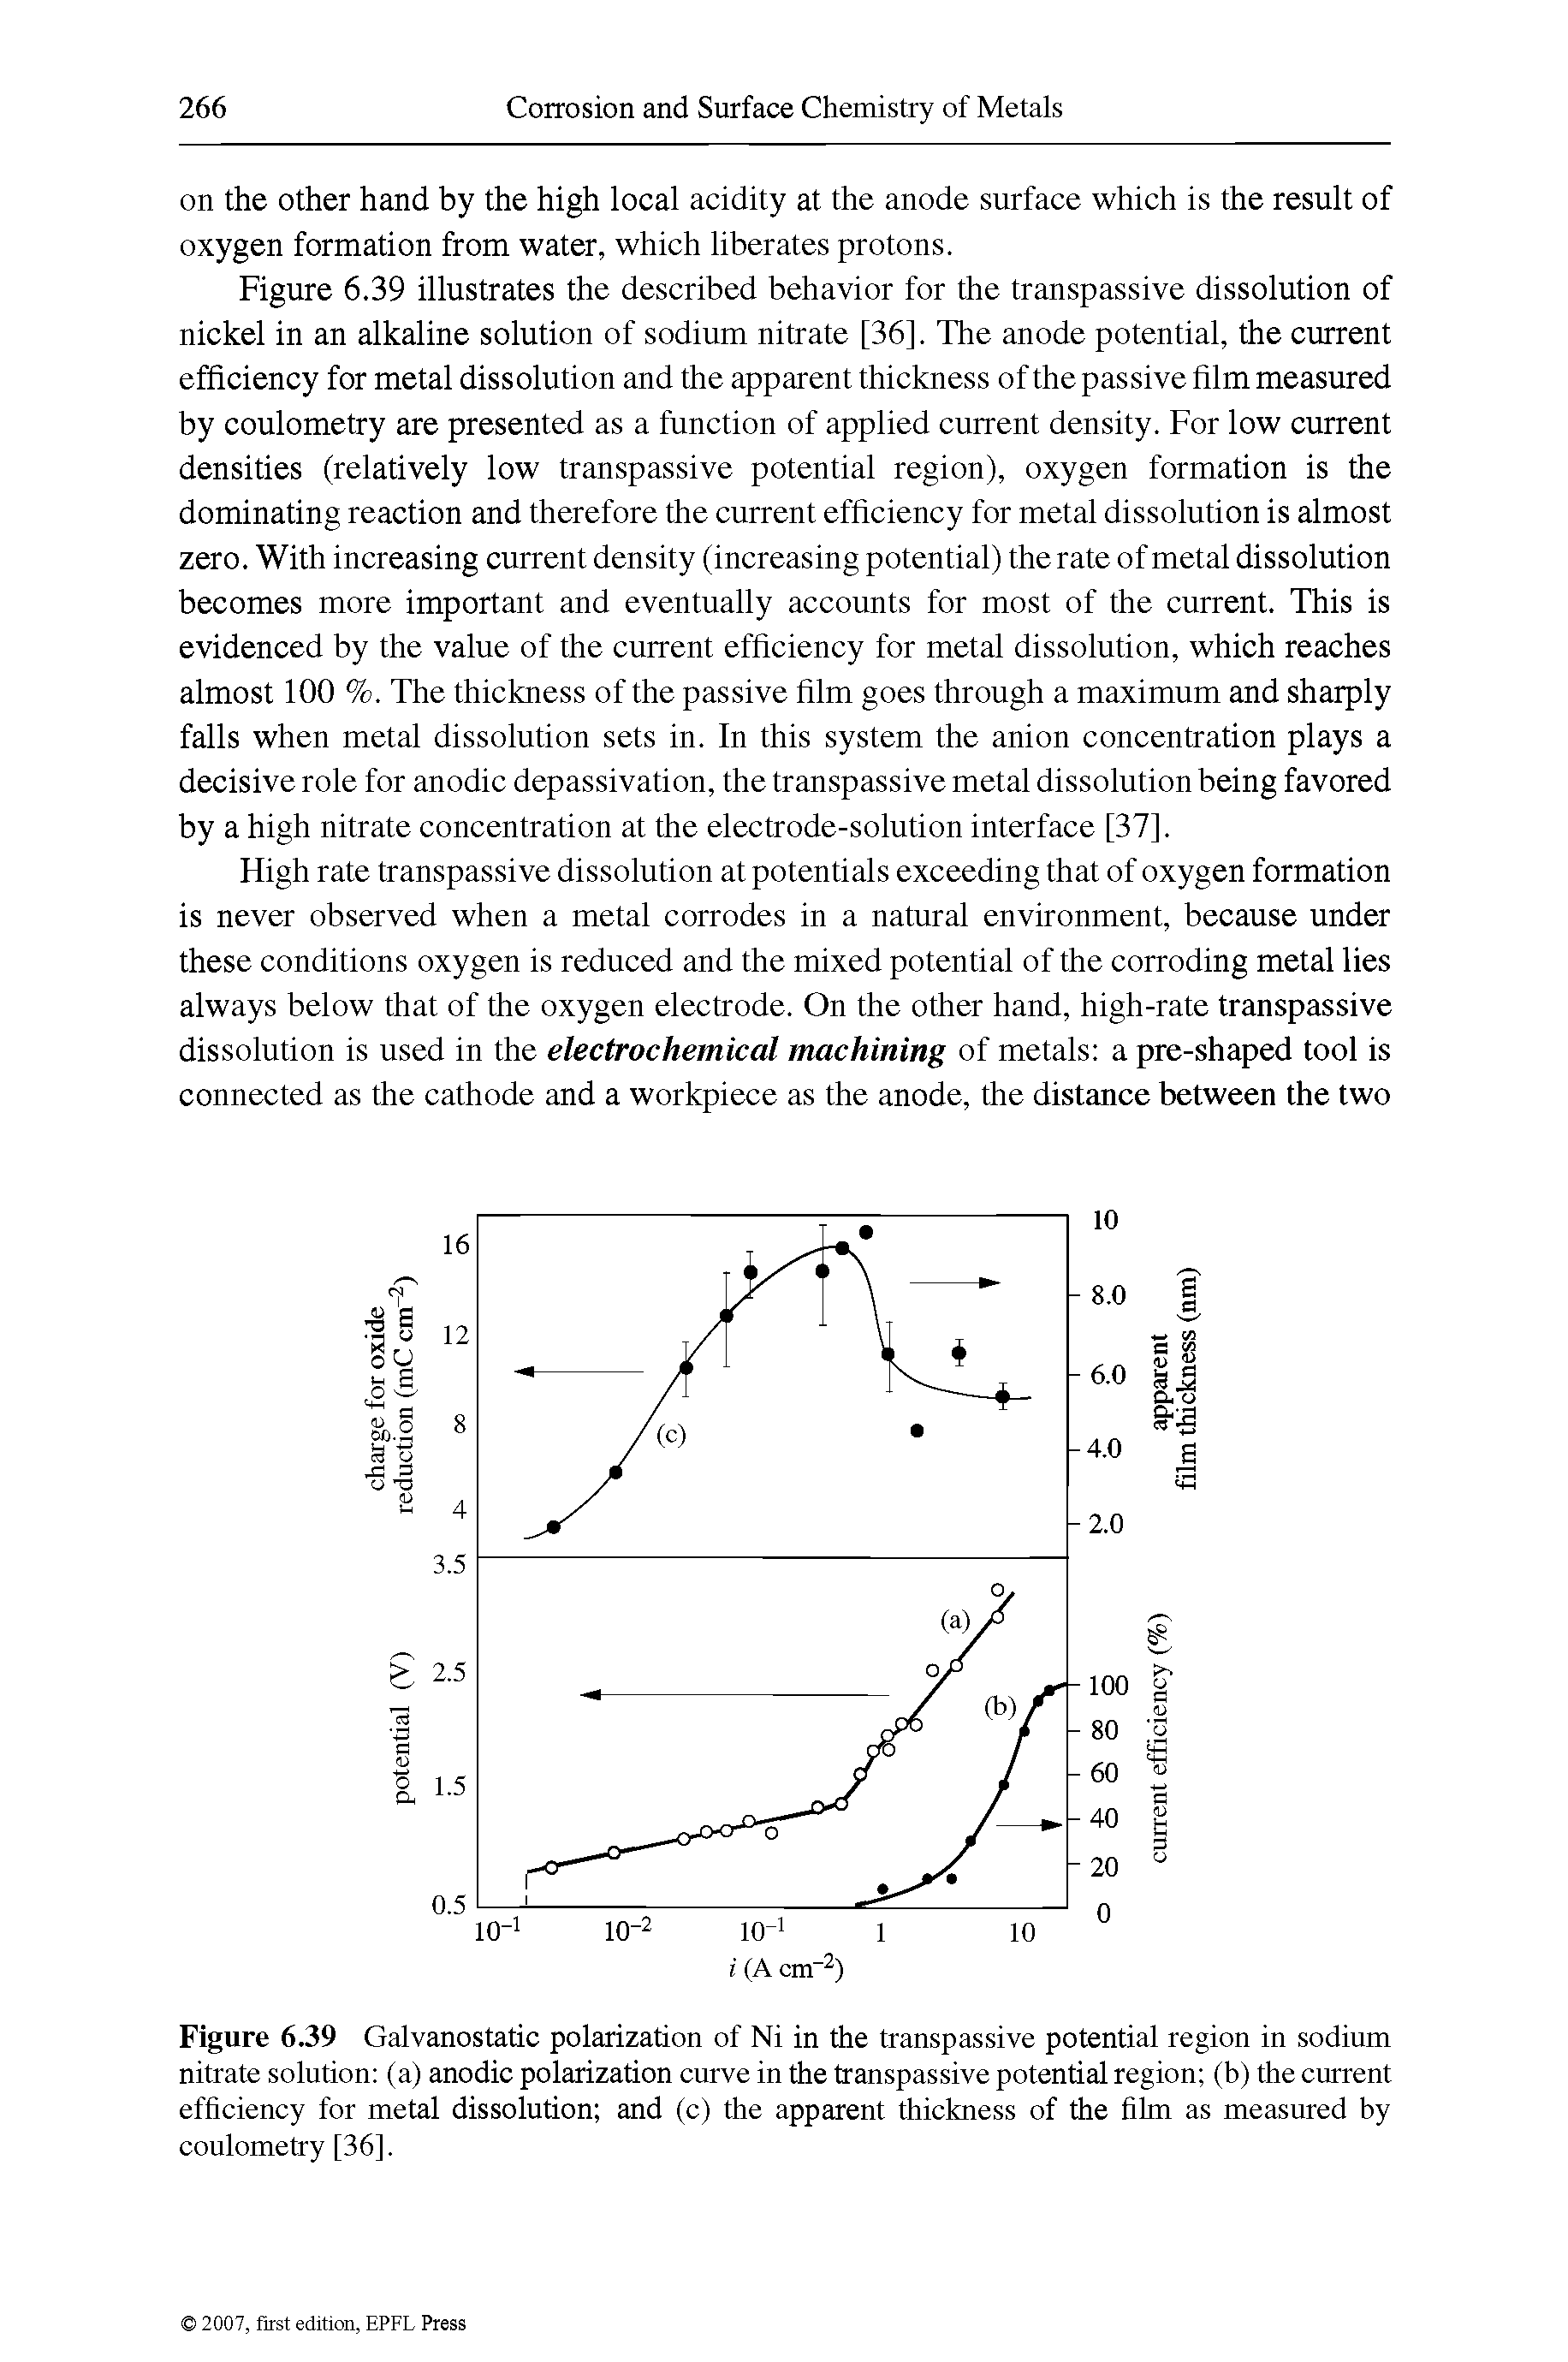 Figure 6.39 Galvanostatic polarization of Ni in the transpassive potential region in sodium nitrate solution (a) anodic polarization curve in the transpassive potential region (b) the current efficiency for metal dissolution and (c) the apparent thickness of the film as measured by coulometry [36].